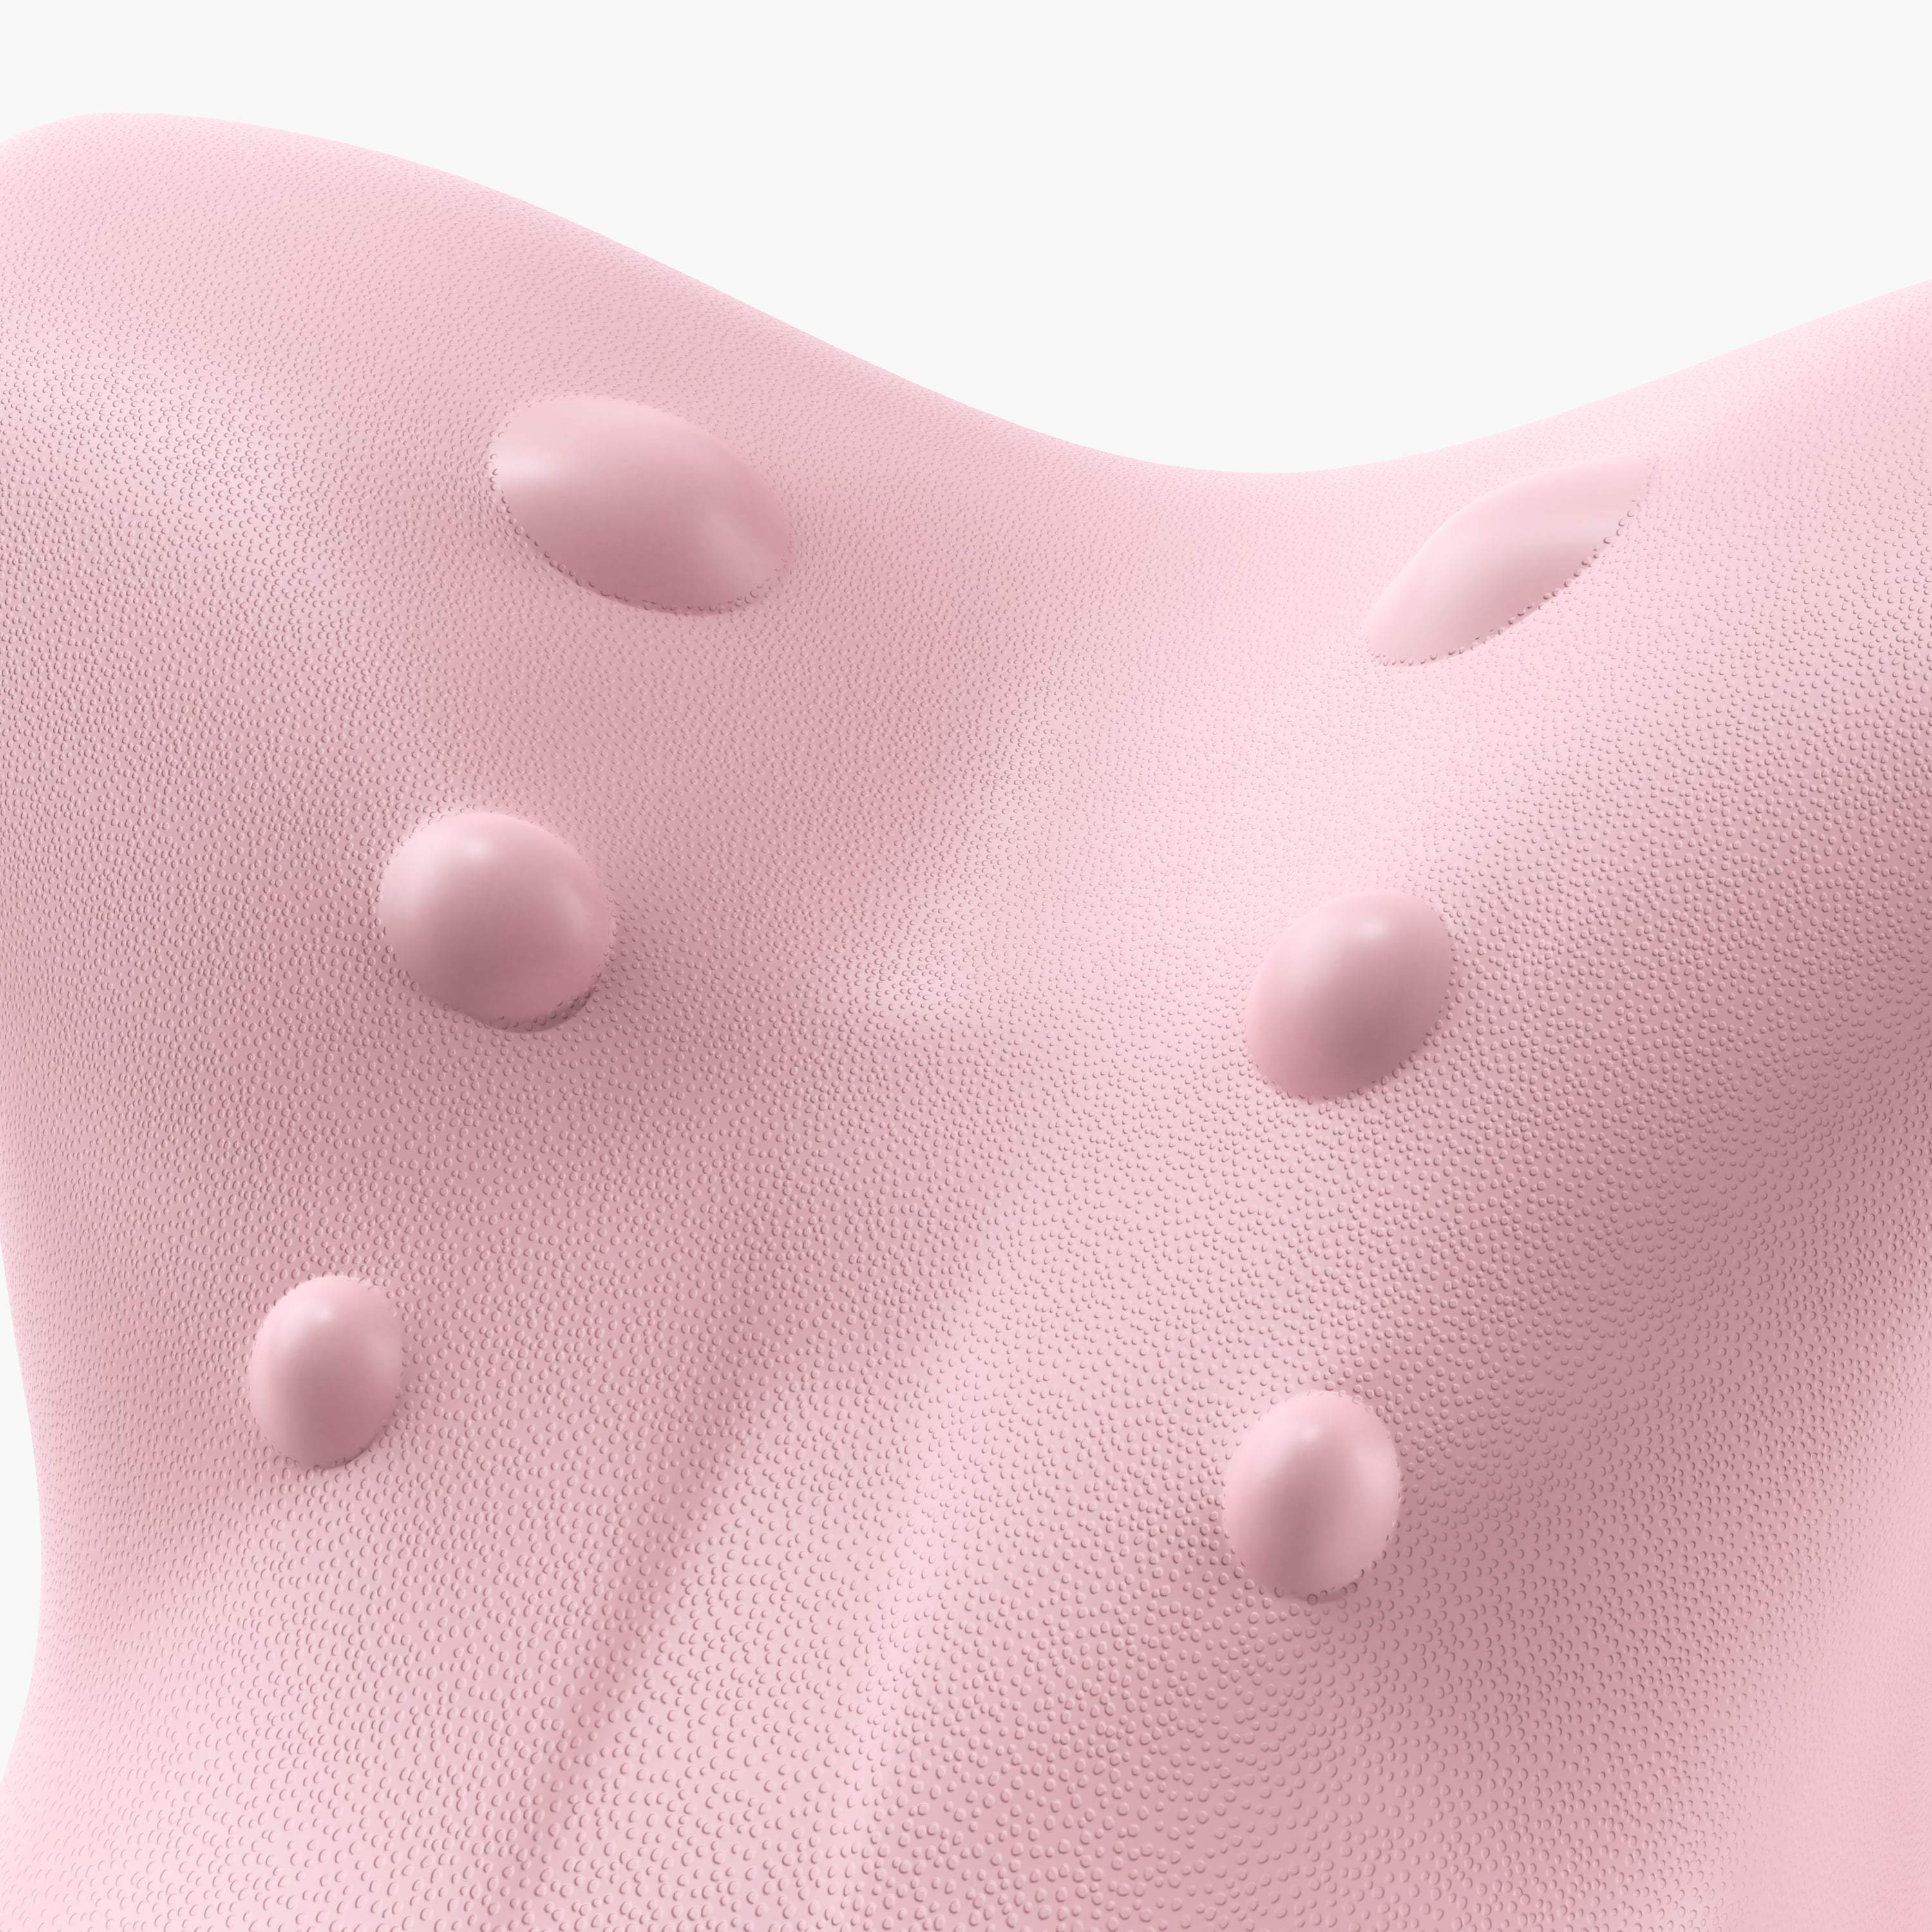 Juno by Nomisk. A pink cervical traction pillow that instantly relieves neck pain. Relieve tension, improve sleep, posture and blood flow by using Juno to stretch out your neck. Shown here as closeup.